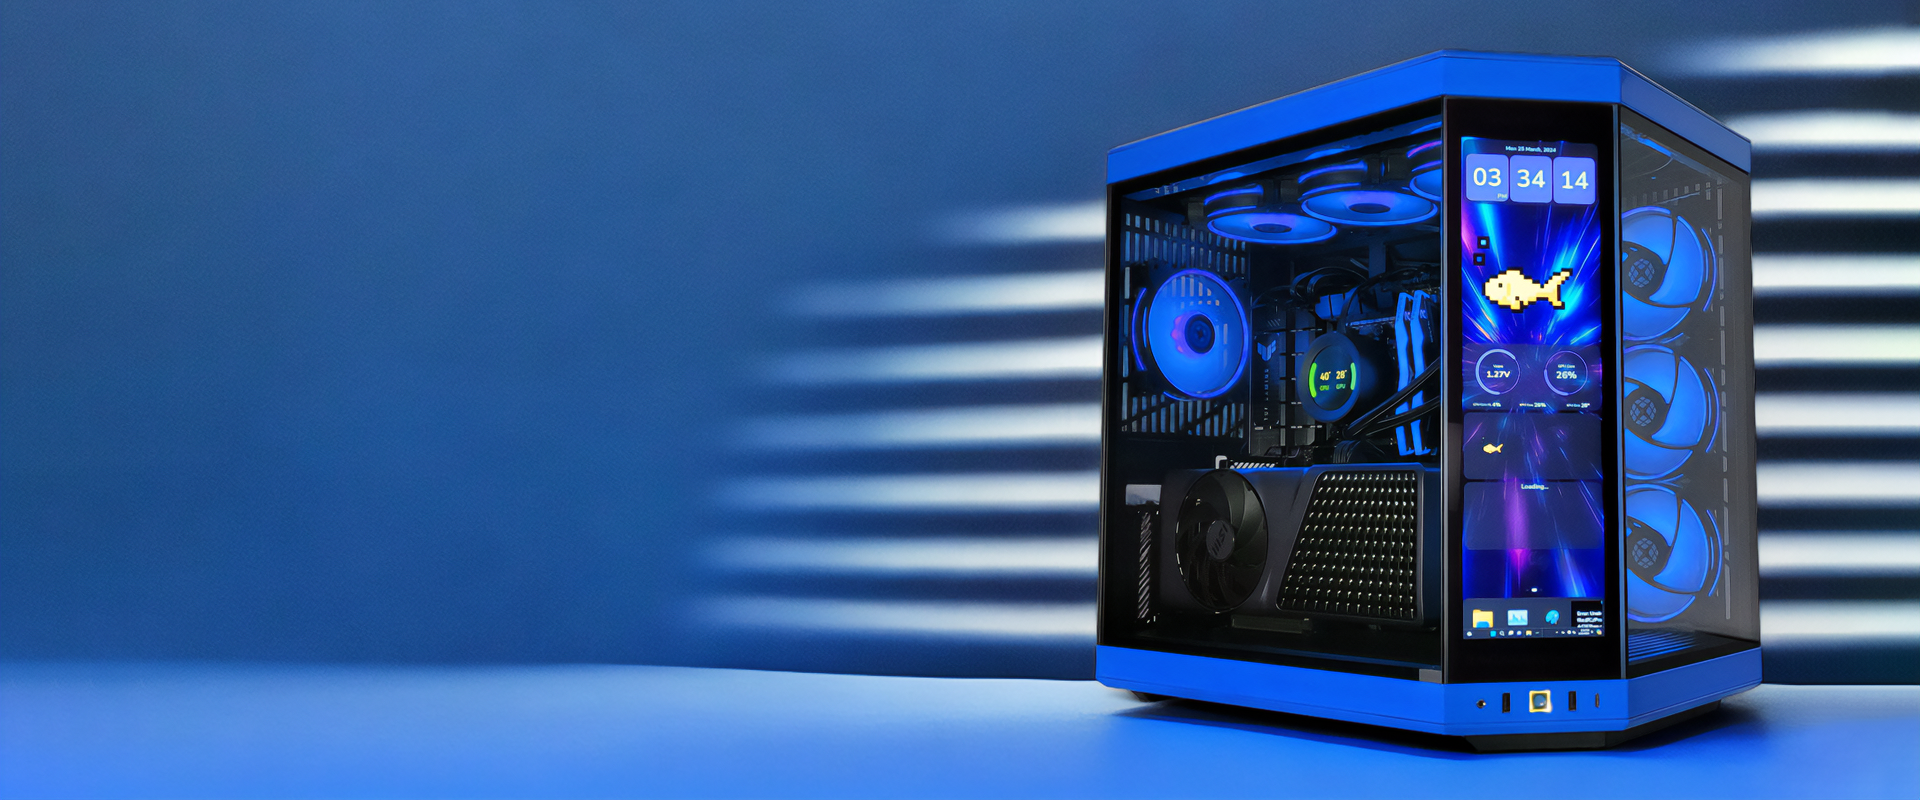 The image showcases a high-end gaming PC with a transparent case illuminated by blue LED lights. The interior components are clearly visible, including multiple fans, a large graphics card, and a CPU cooler. The front panel features an integrated display showing system metrics, time, and an animated fish. The background is a gradient of blue tones, giving the entire setup a futuristic and sleek appearance.